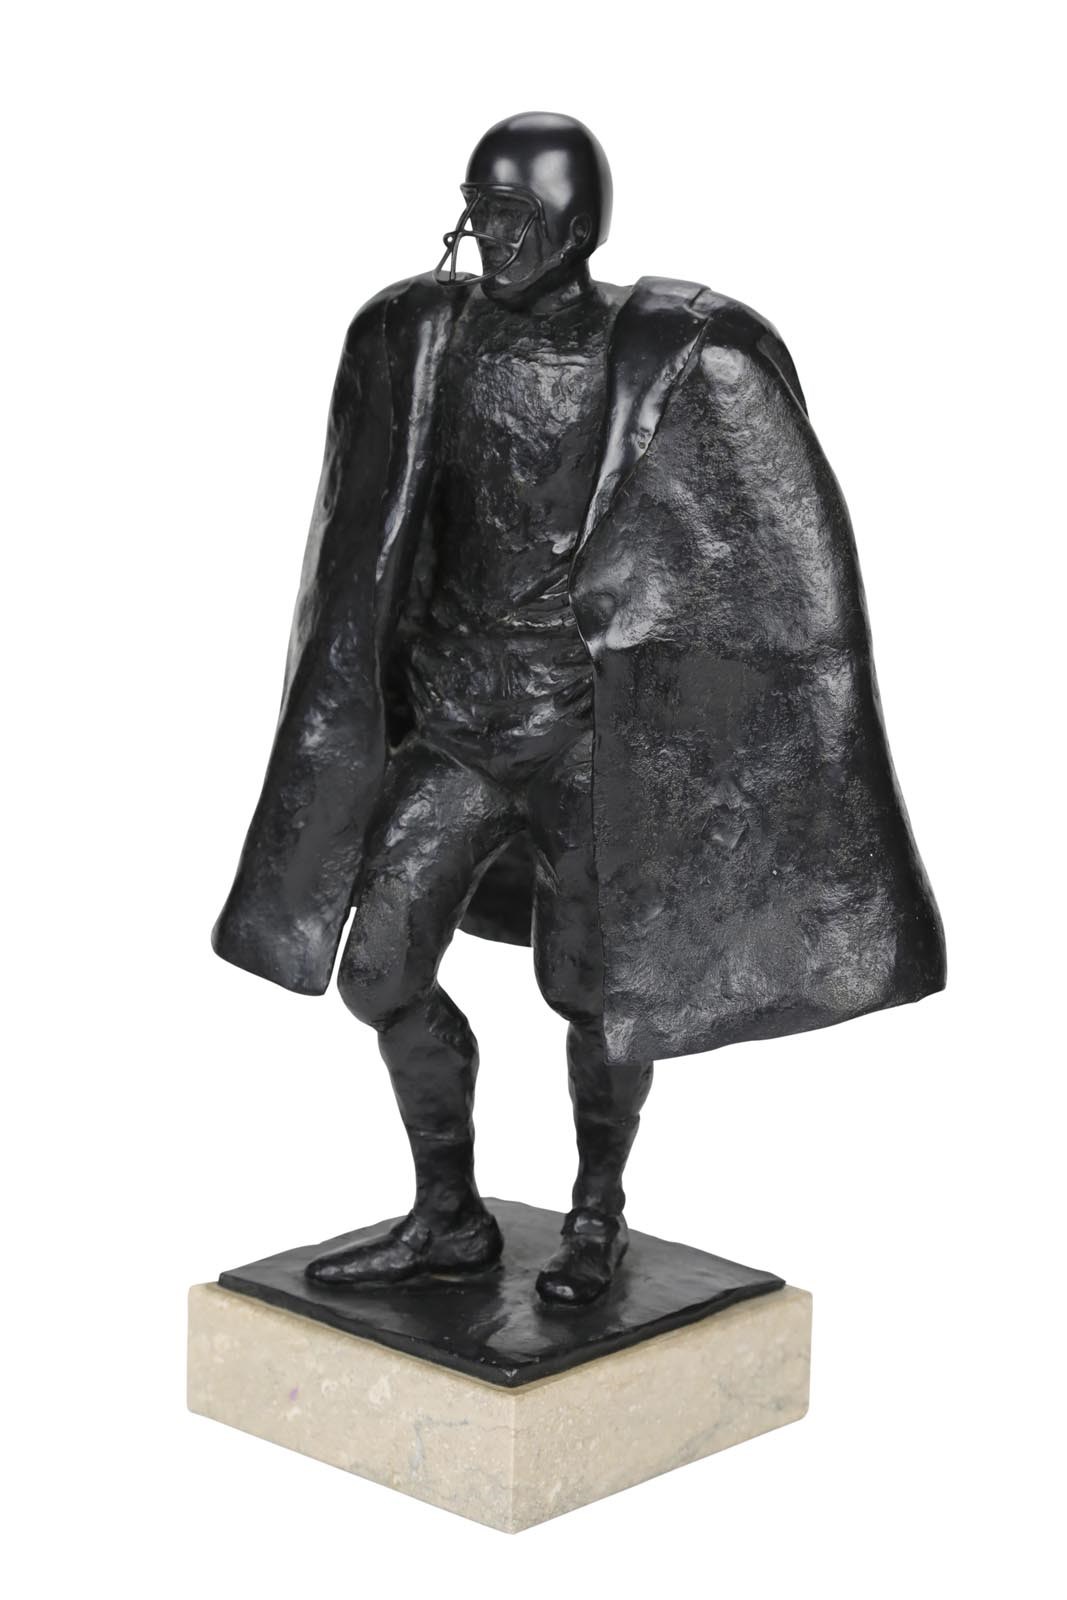 - 1968 Original Bronze Commissioned by the NFL for the "Walter Payton NFL Man of the Year' Award by Daniel Schwartz